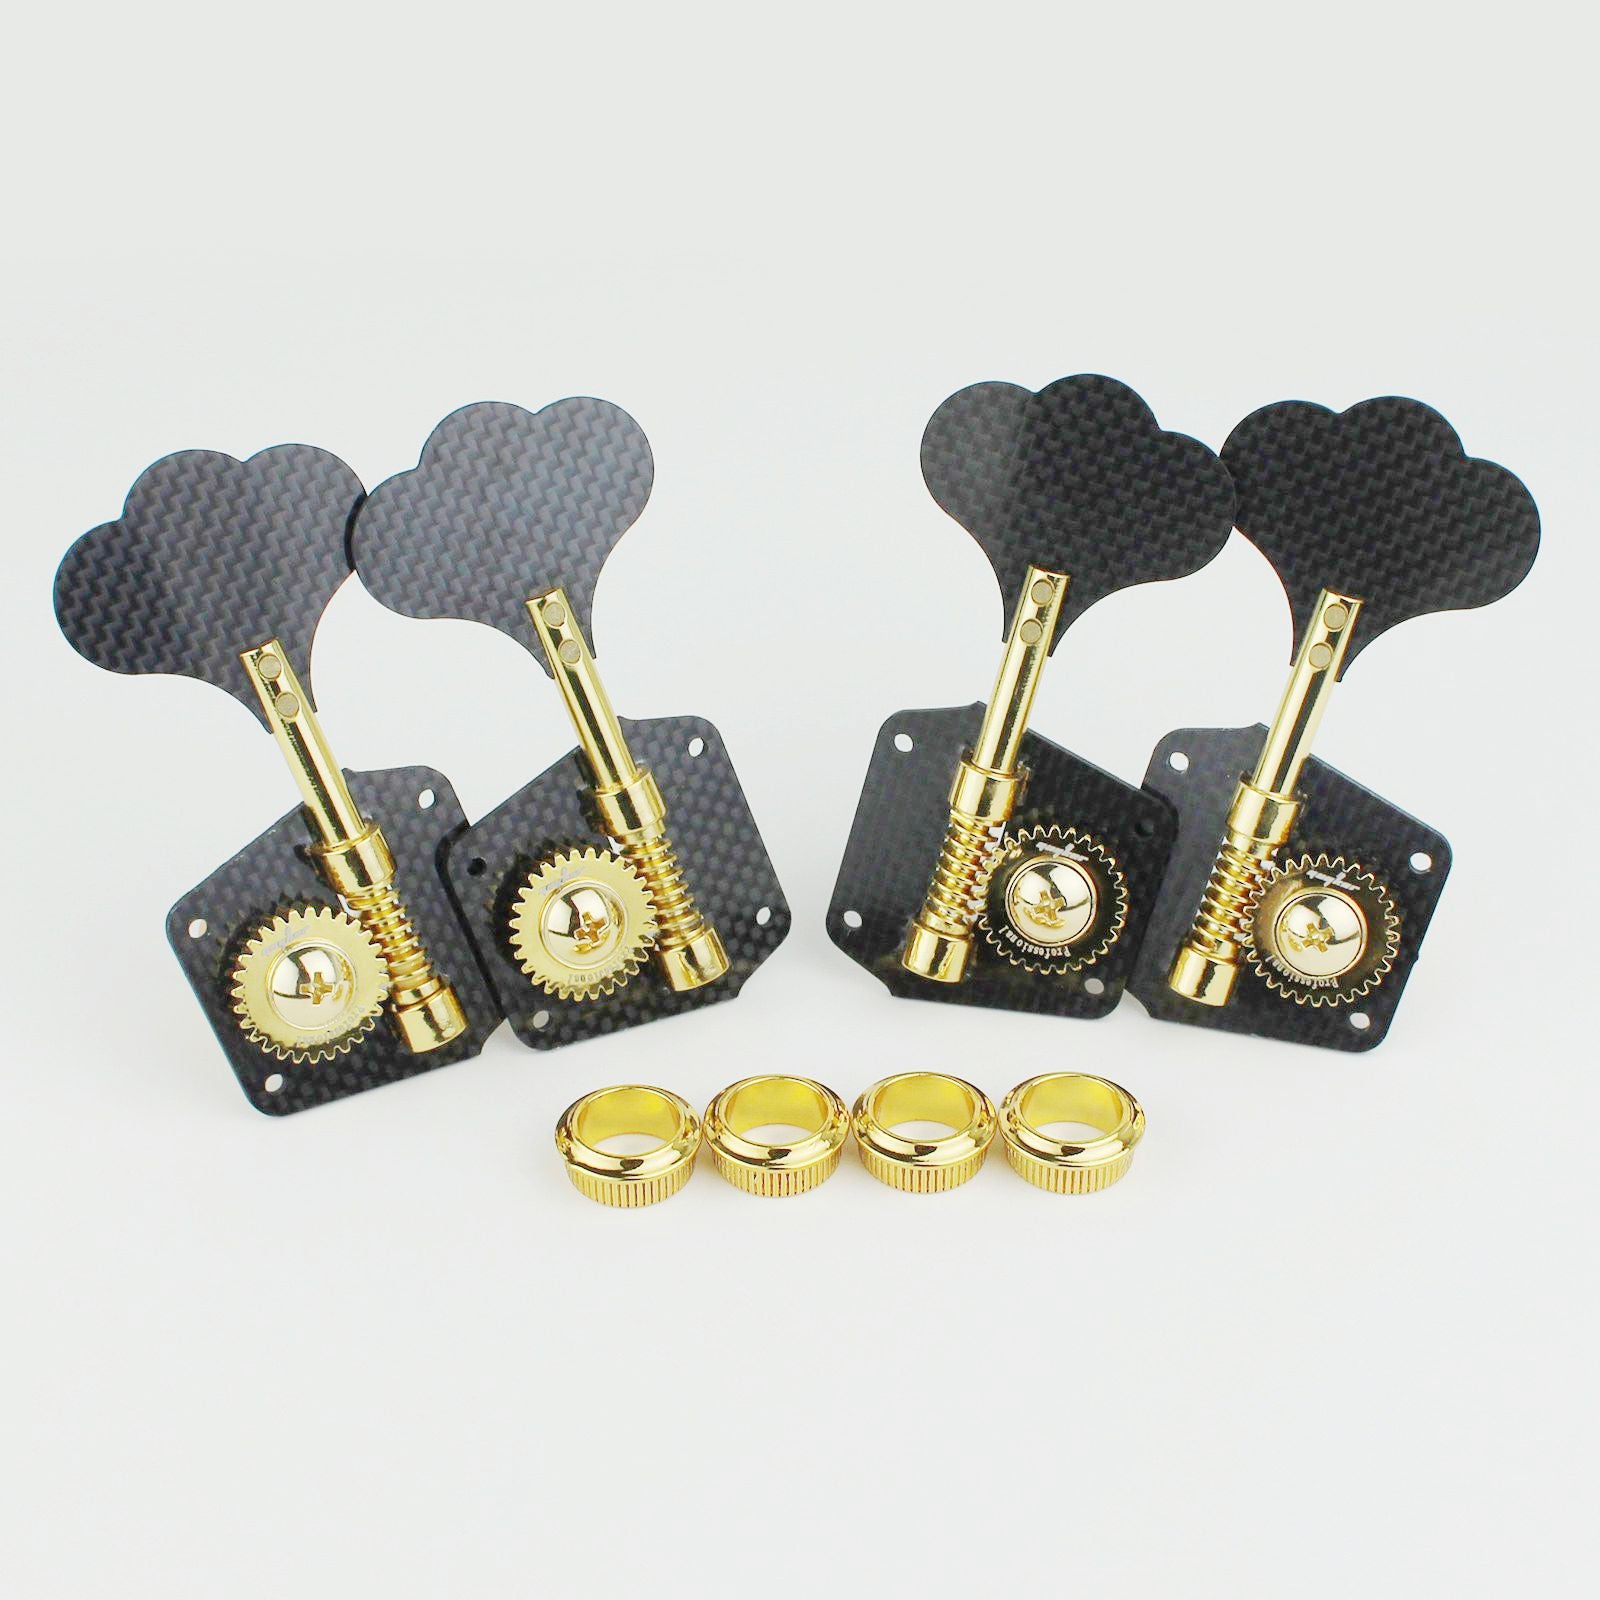 GB-530T Carbon Fiber Tuning Pegs for Bass Gear ratio 1:26